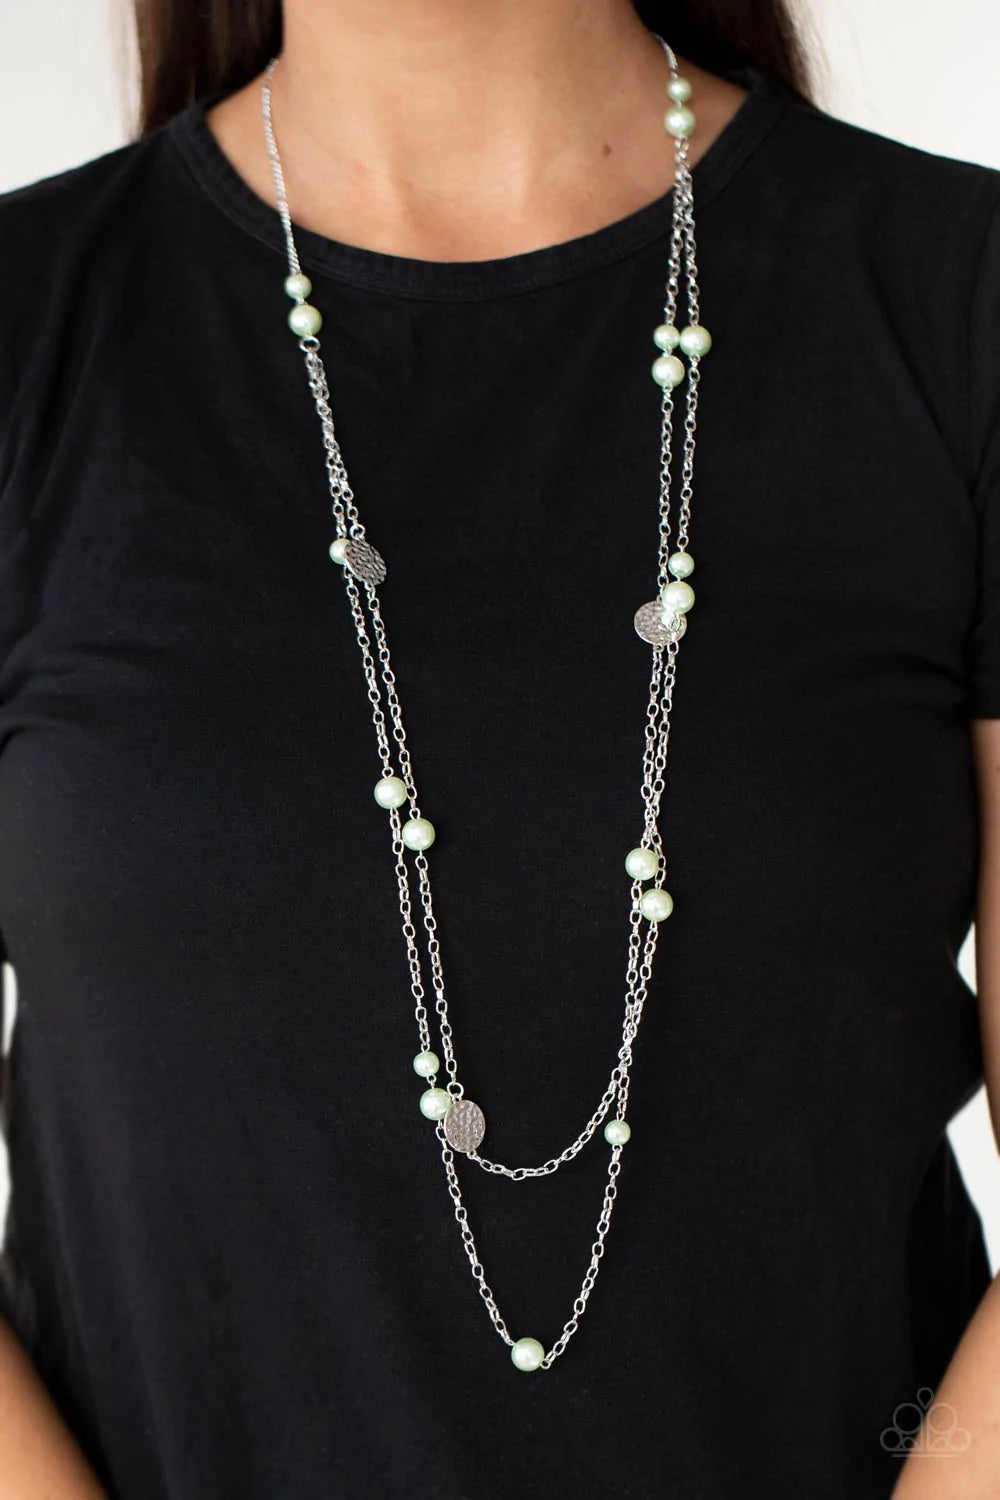 Sublime Awakening Paparazzi Accessories Necklaces with Earrings Green